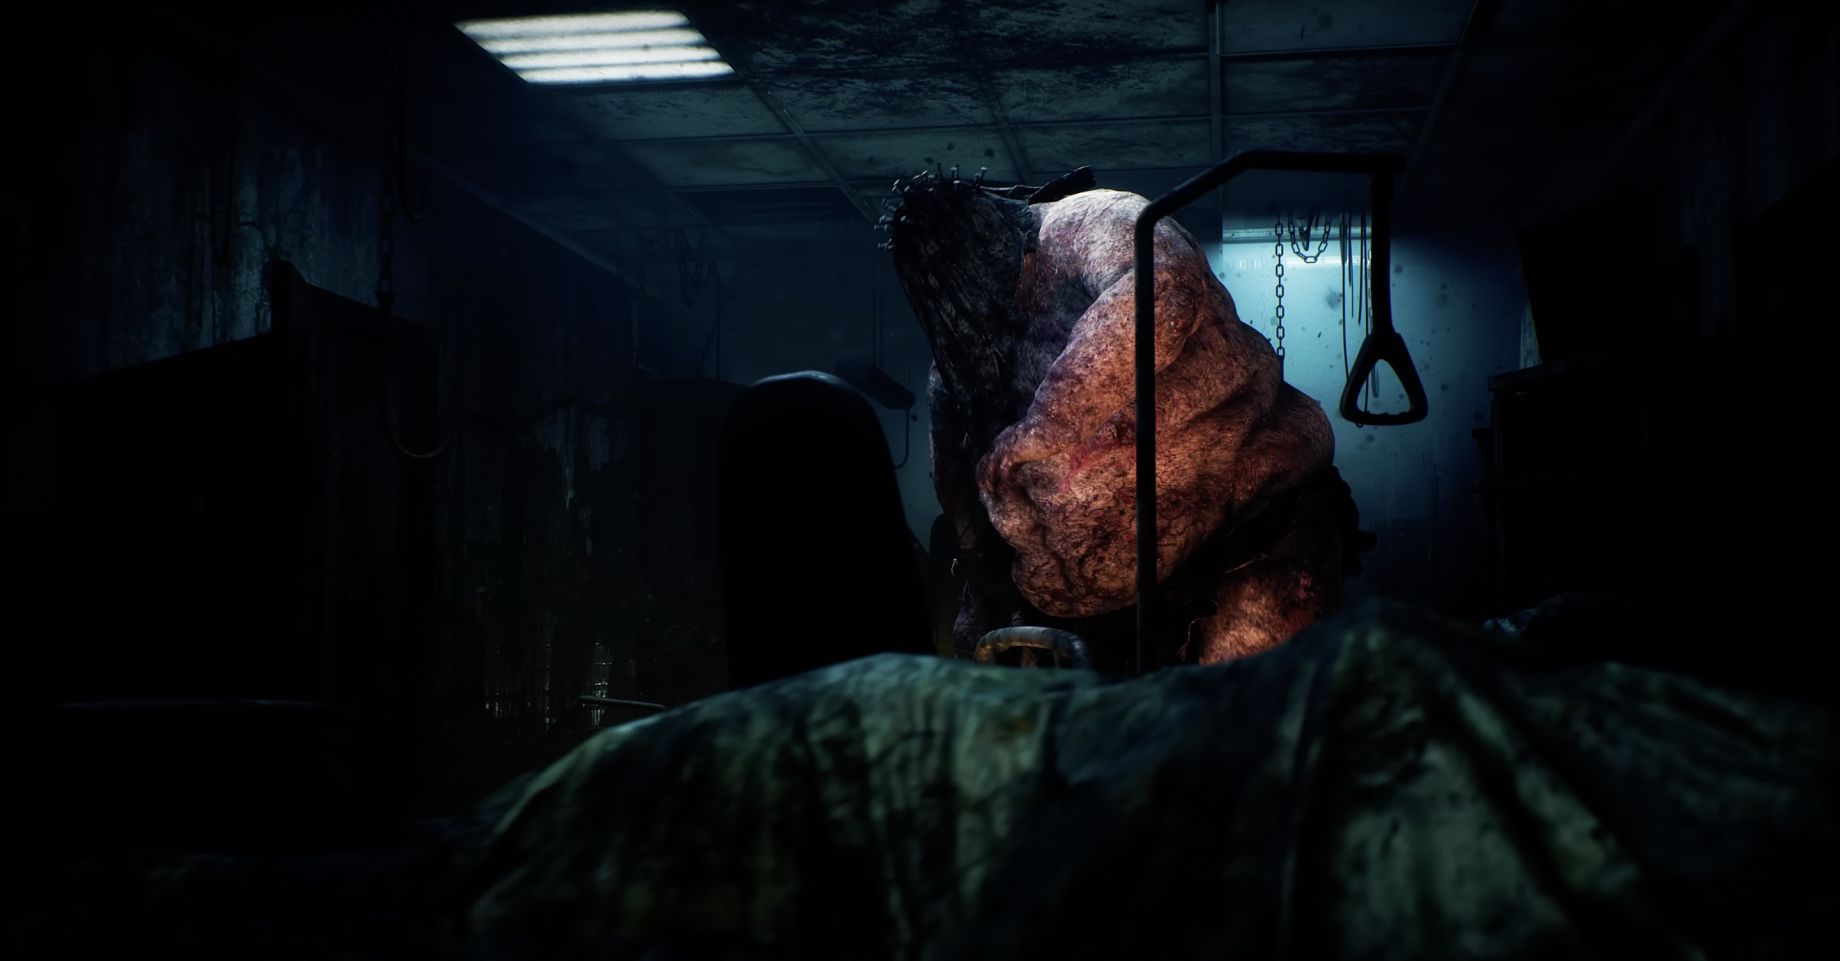 Silent Hill Ascension: Release date, platforms, gameplay, more